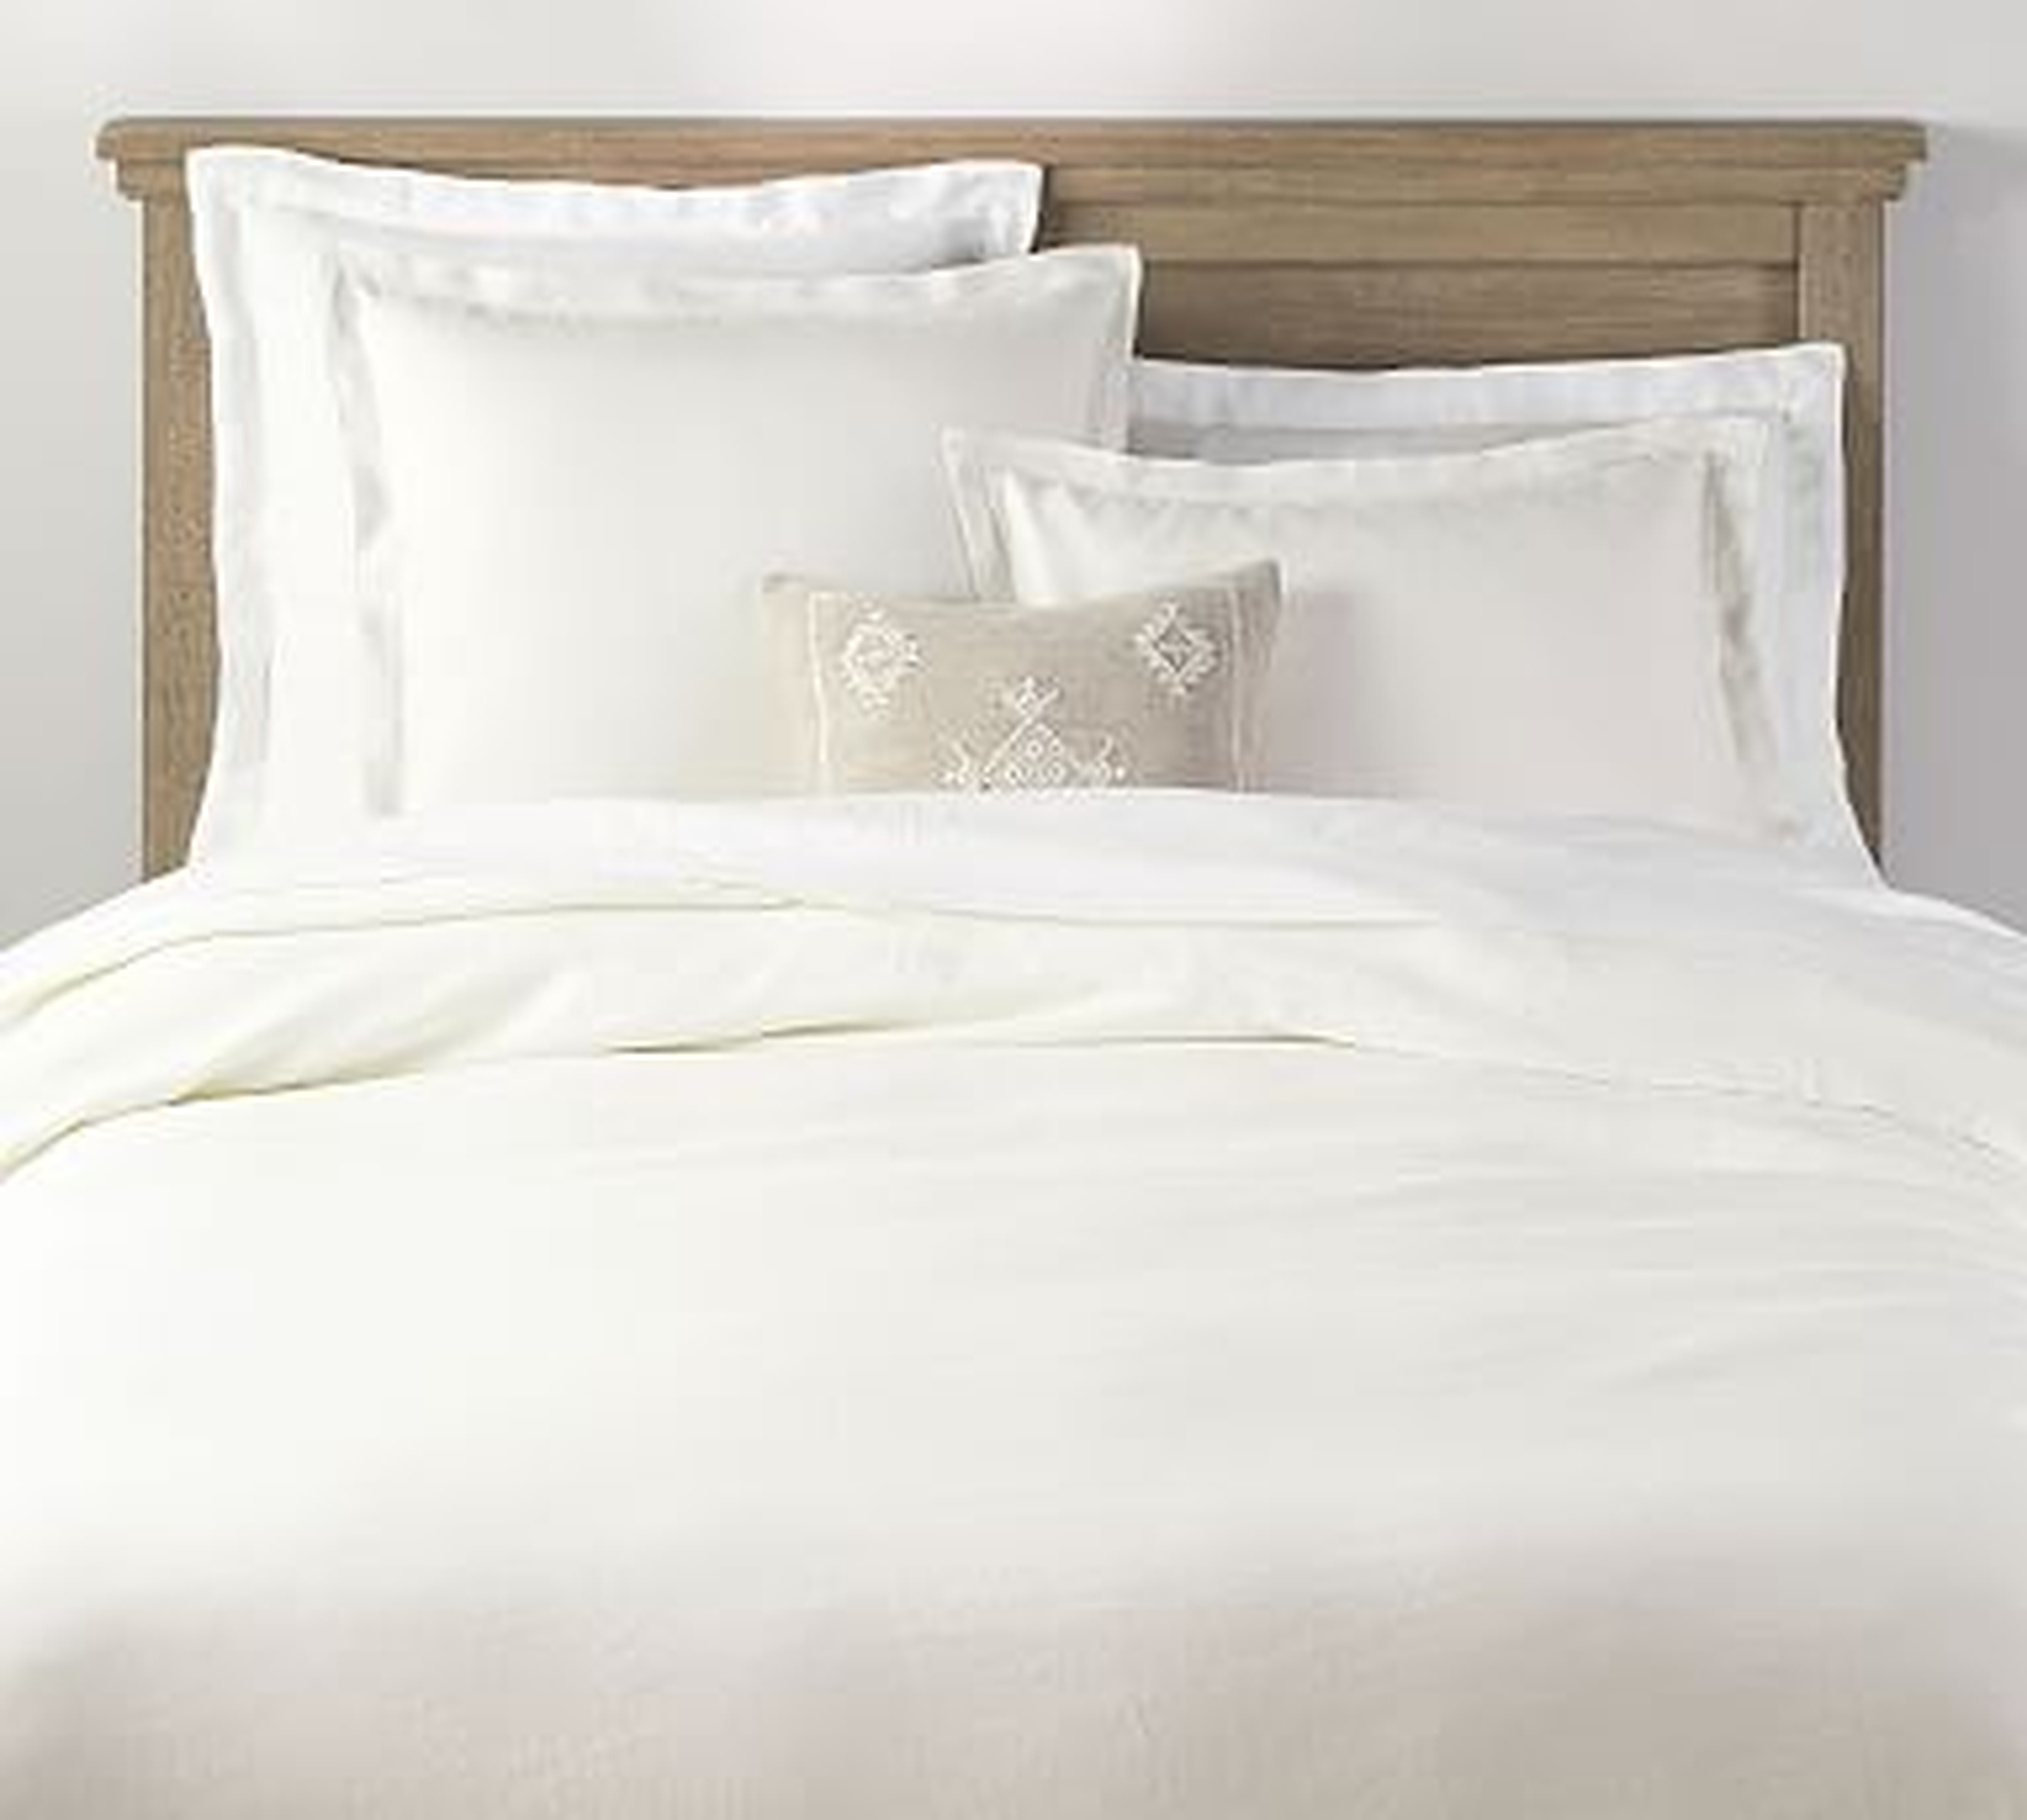 Belgian Flax Linen Double Flange Duvet Cover, King,/Cal. King, Classic Ivory - Pottery Barn